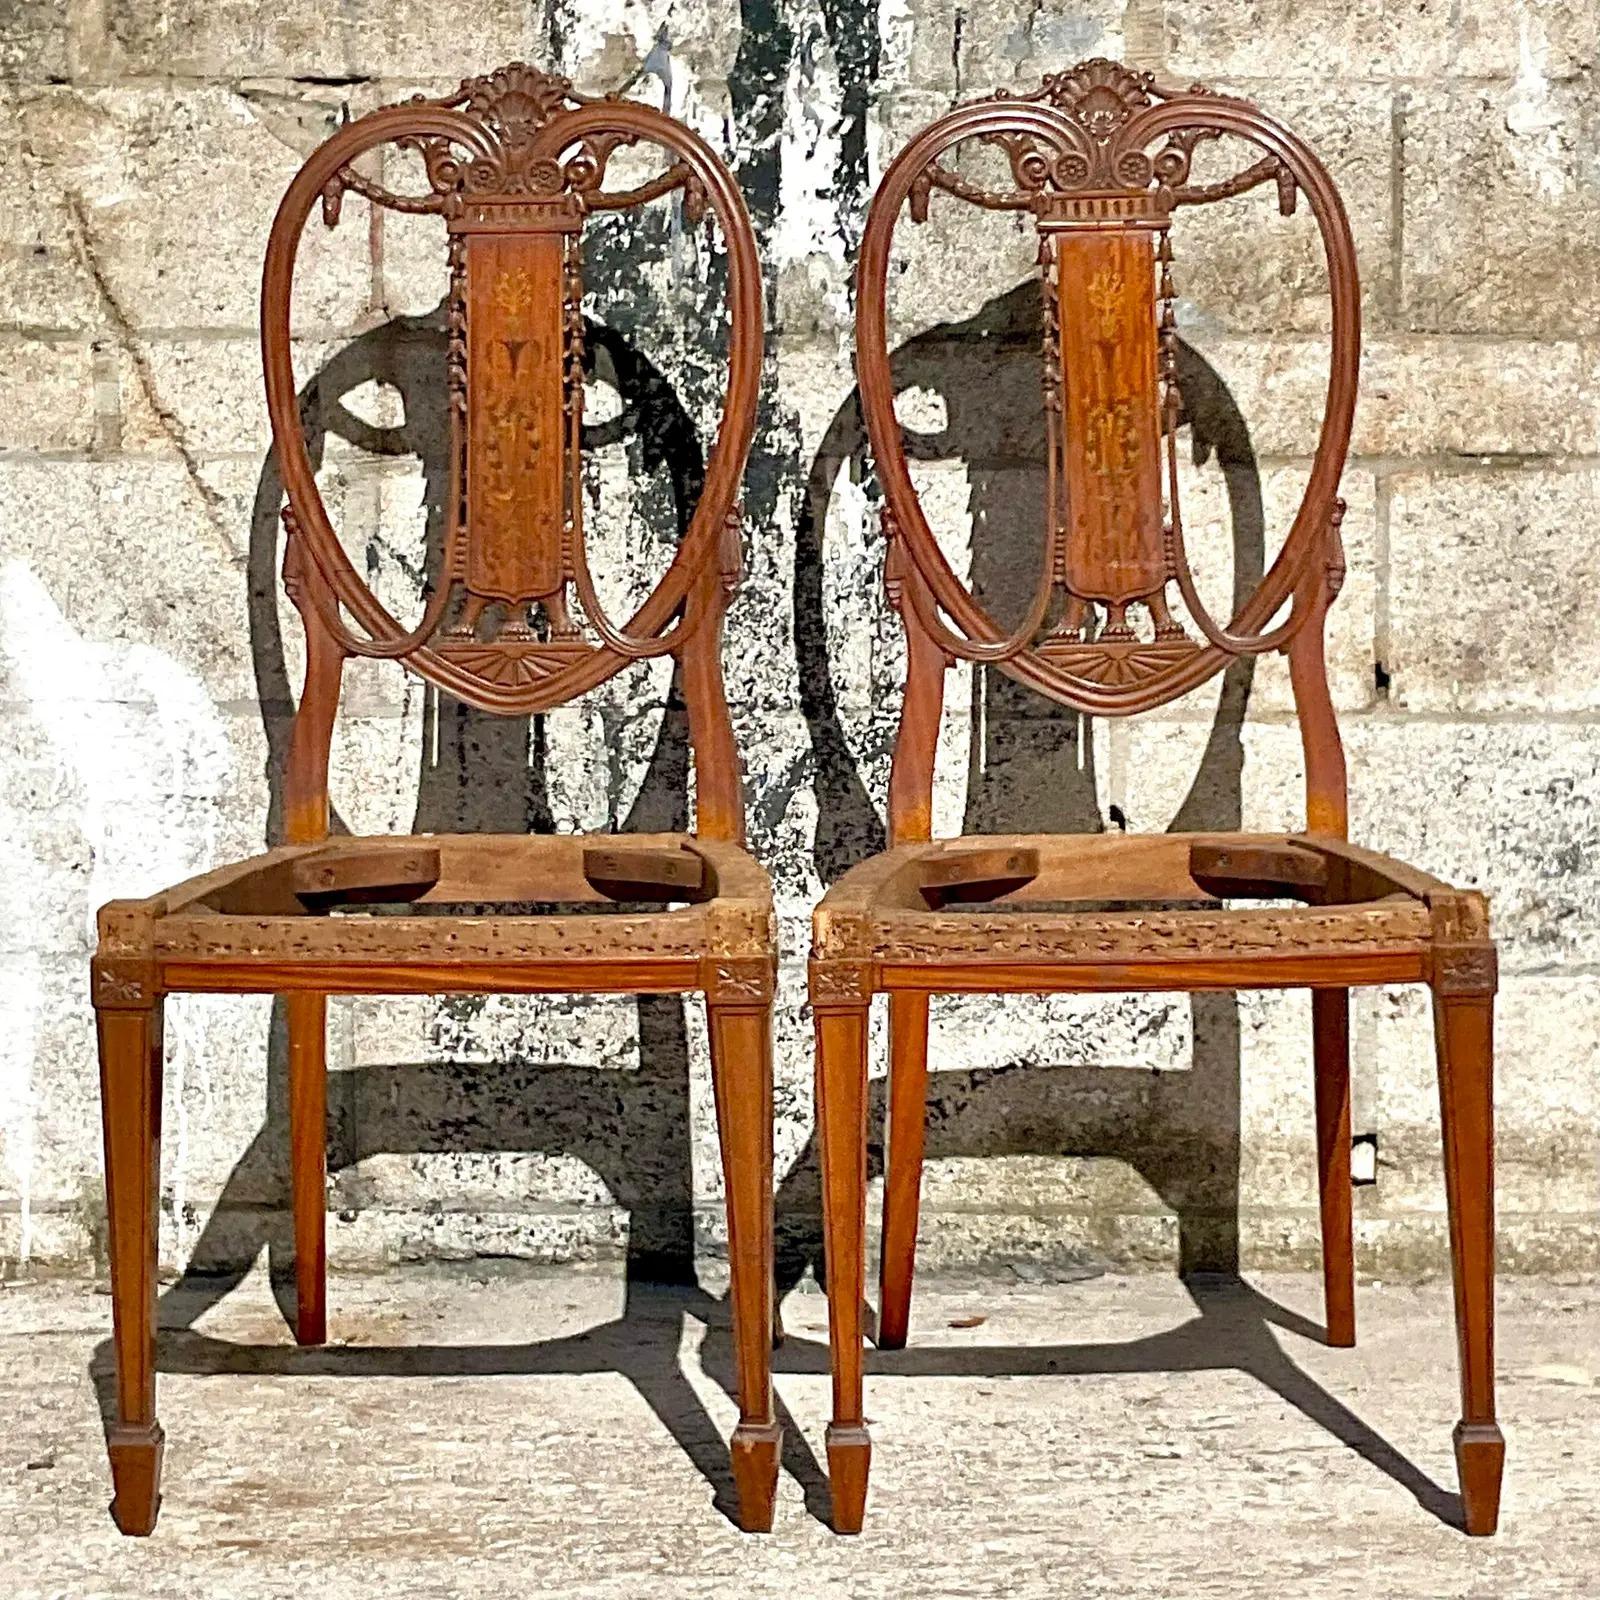 North American Vintage Regency Marquetry Balloon Back Chairs - a Pair For Sale